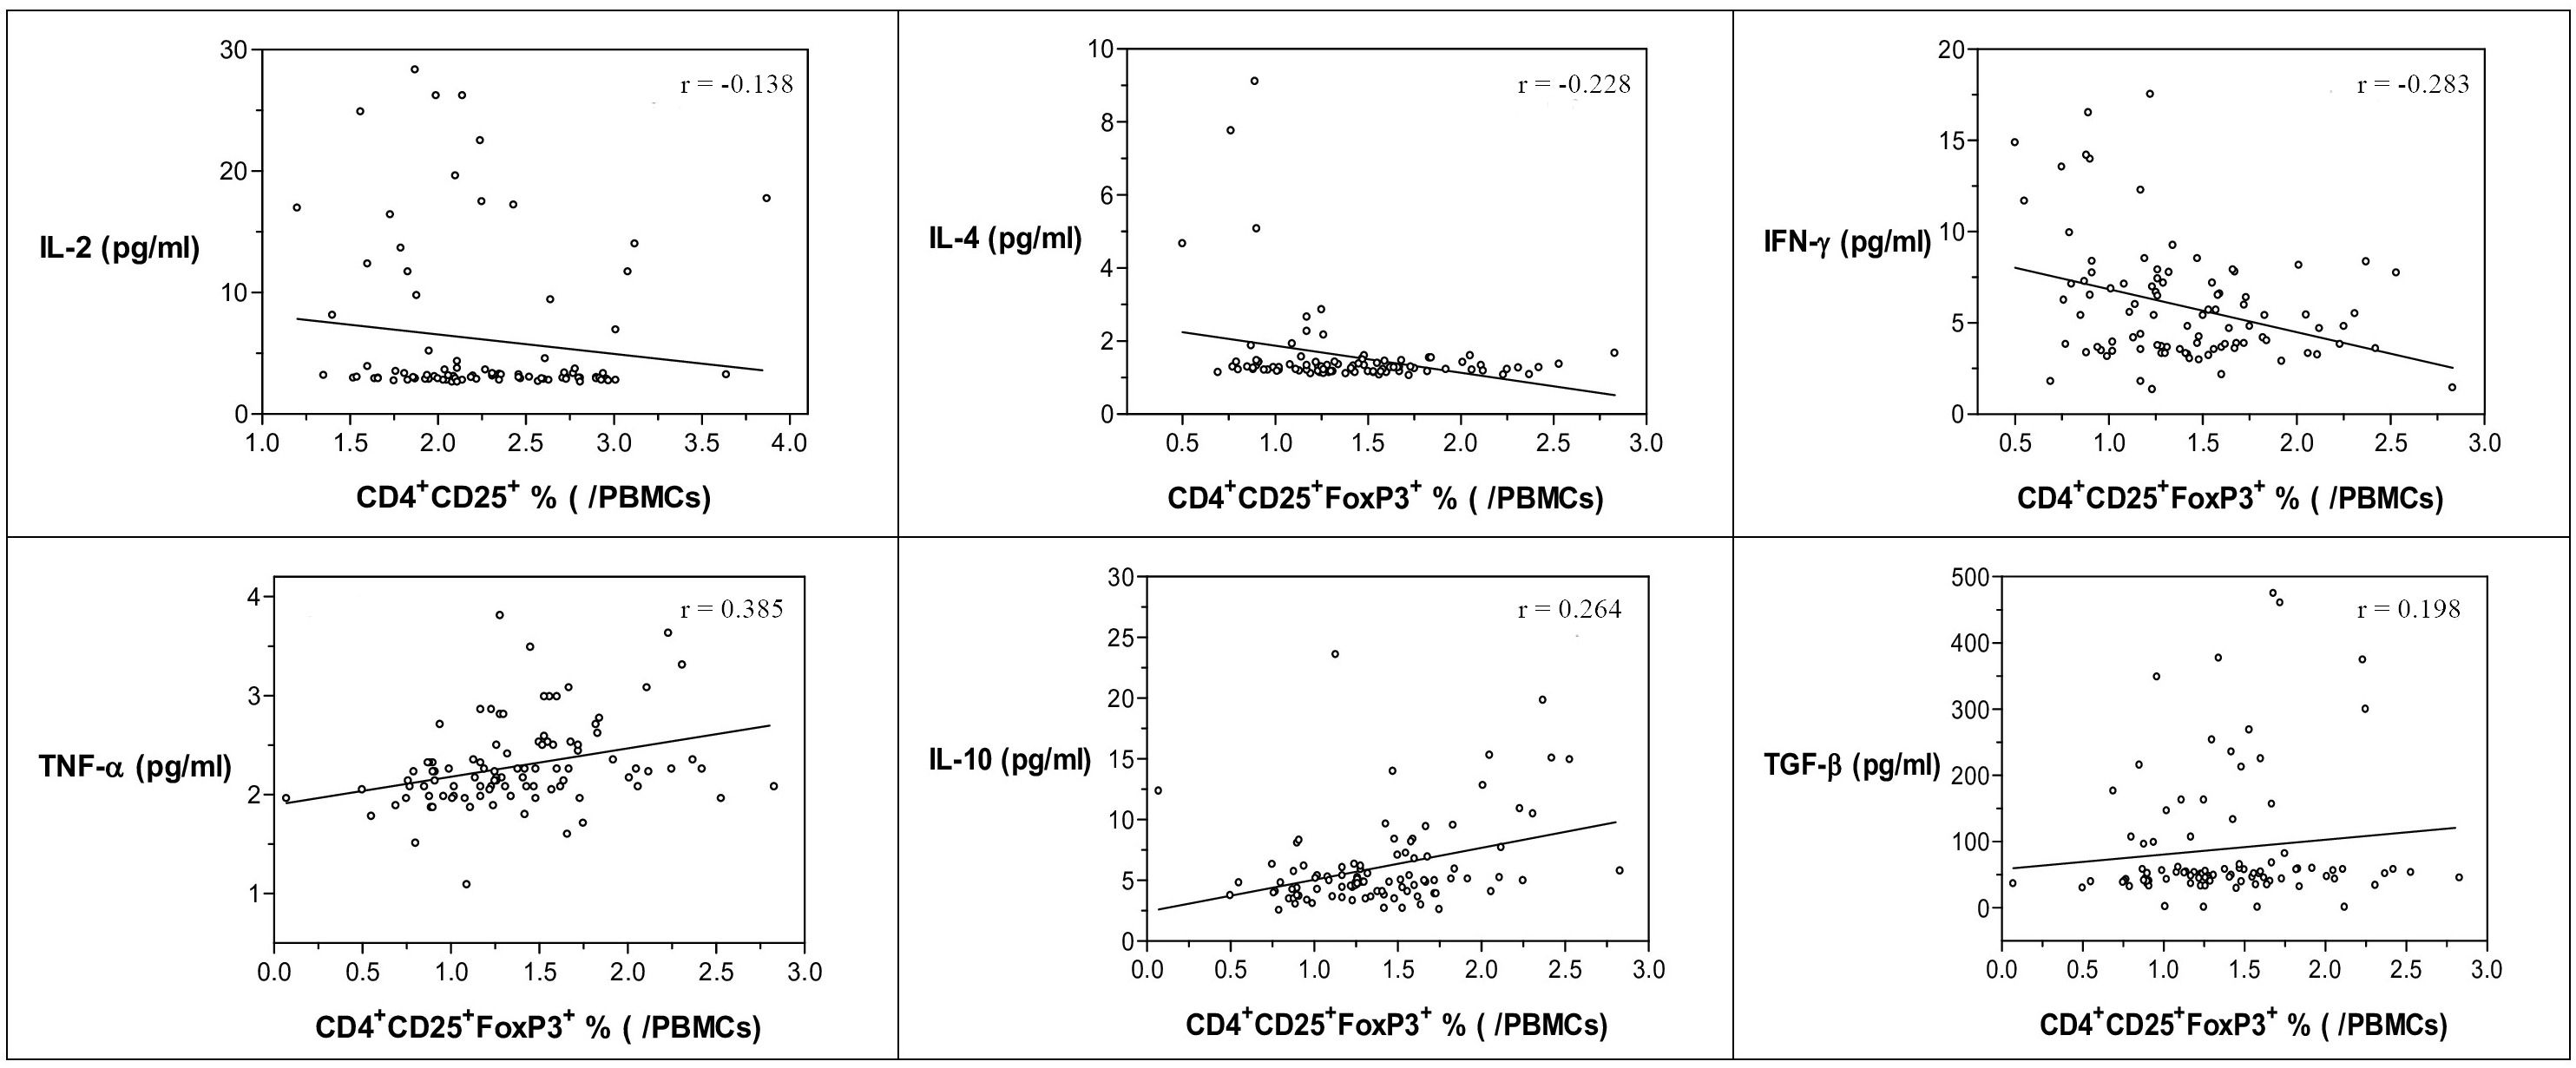 Fig. 1 
            Correlations among CD4+CD25+Foxp3+T-regs and cytokines (interleukin (IL)-2, IL-4, interferon (IFN)-γ, tumour necrosis factor-α (TNF-α), IL-10, and transforming growth factor (TGF)-β) in total ankylosing spondylitis (AS) patients. Values are shown as r, determined with Spearman’s rank correlation test. PBMCs, peripheral blood mononuclear cells; T-regs, regulatory T cells.
          